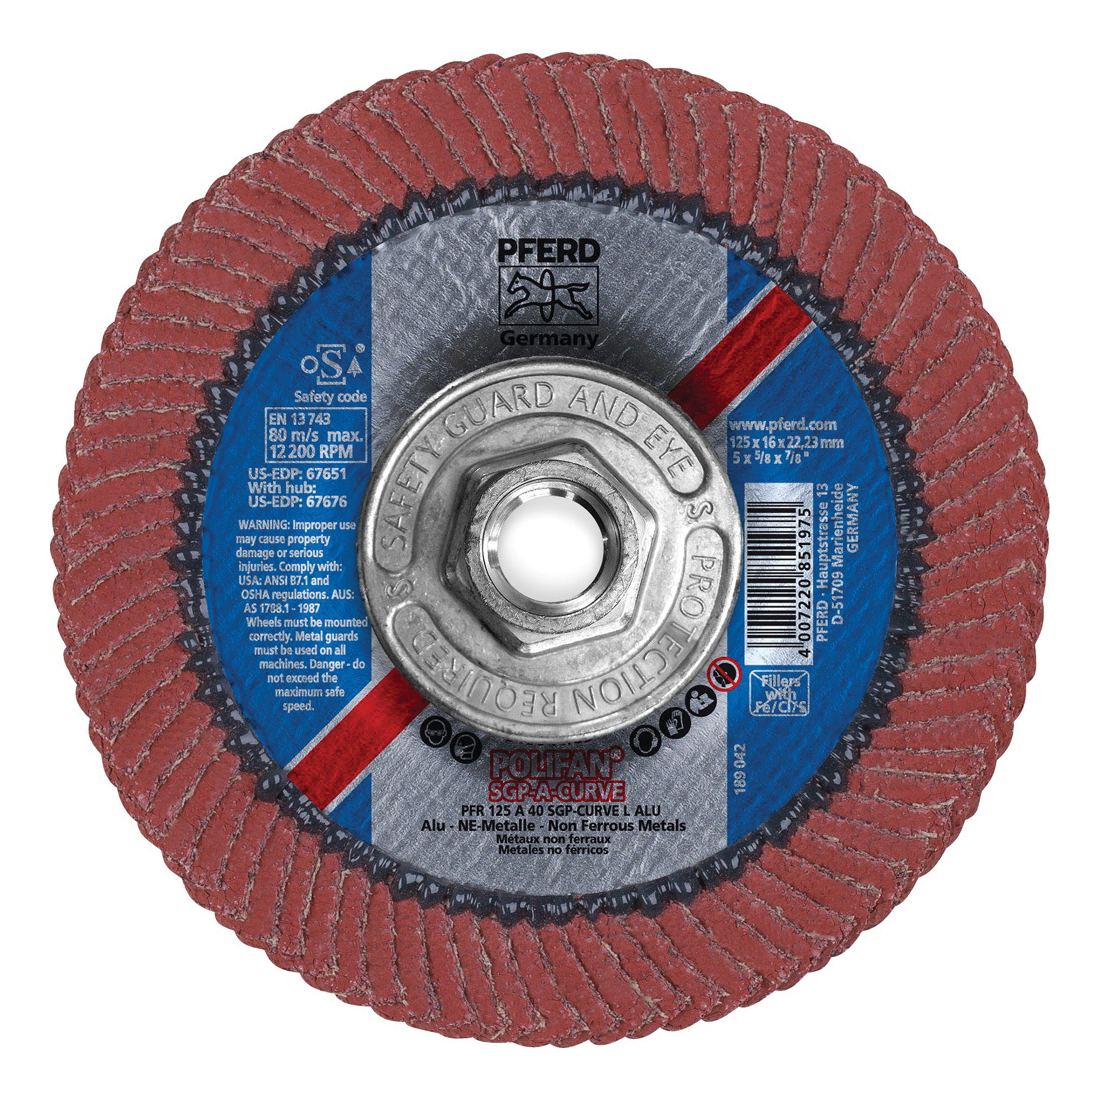 PFERD Polifan® 67676 Special Line SGP-PLUS CURVE-ALU Threaded Coated Abrasive Flap Disc, 5 in Dia, 40 Grit, Topsized Aluminum Oxide Abrasive, Type PFR/Radial Disc